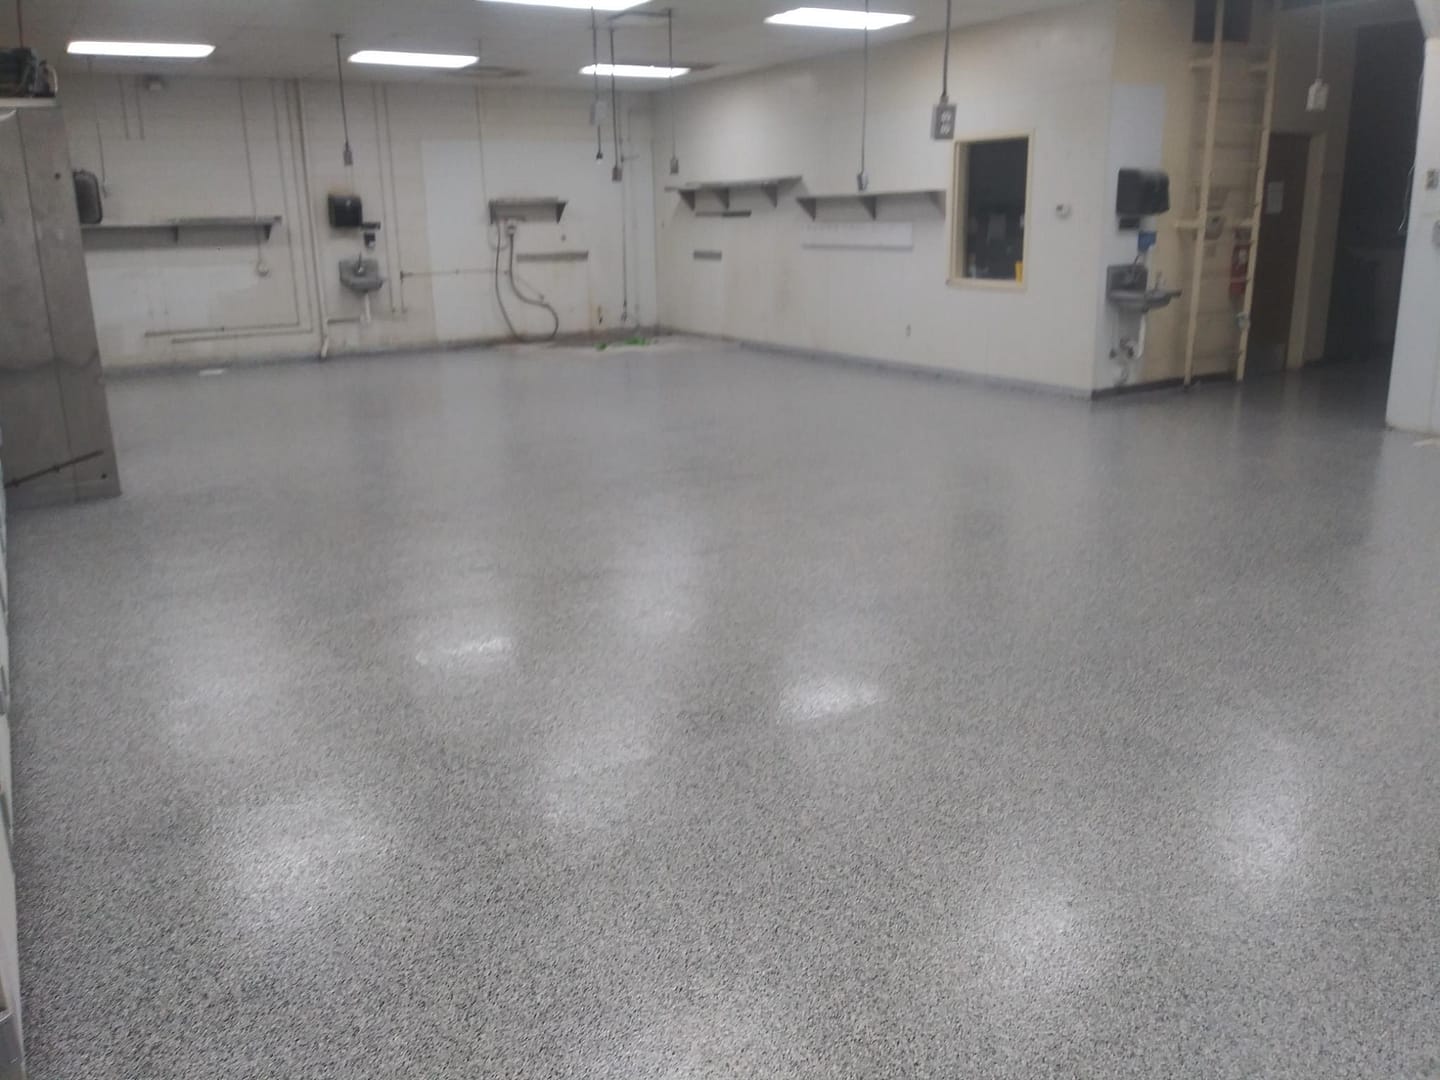 bakery colorado springs finished floor